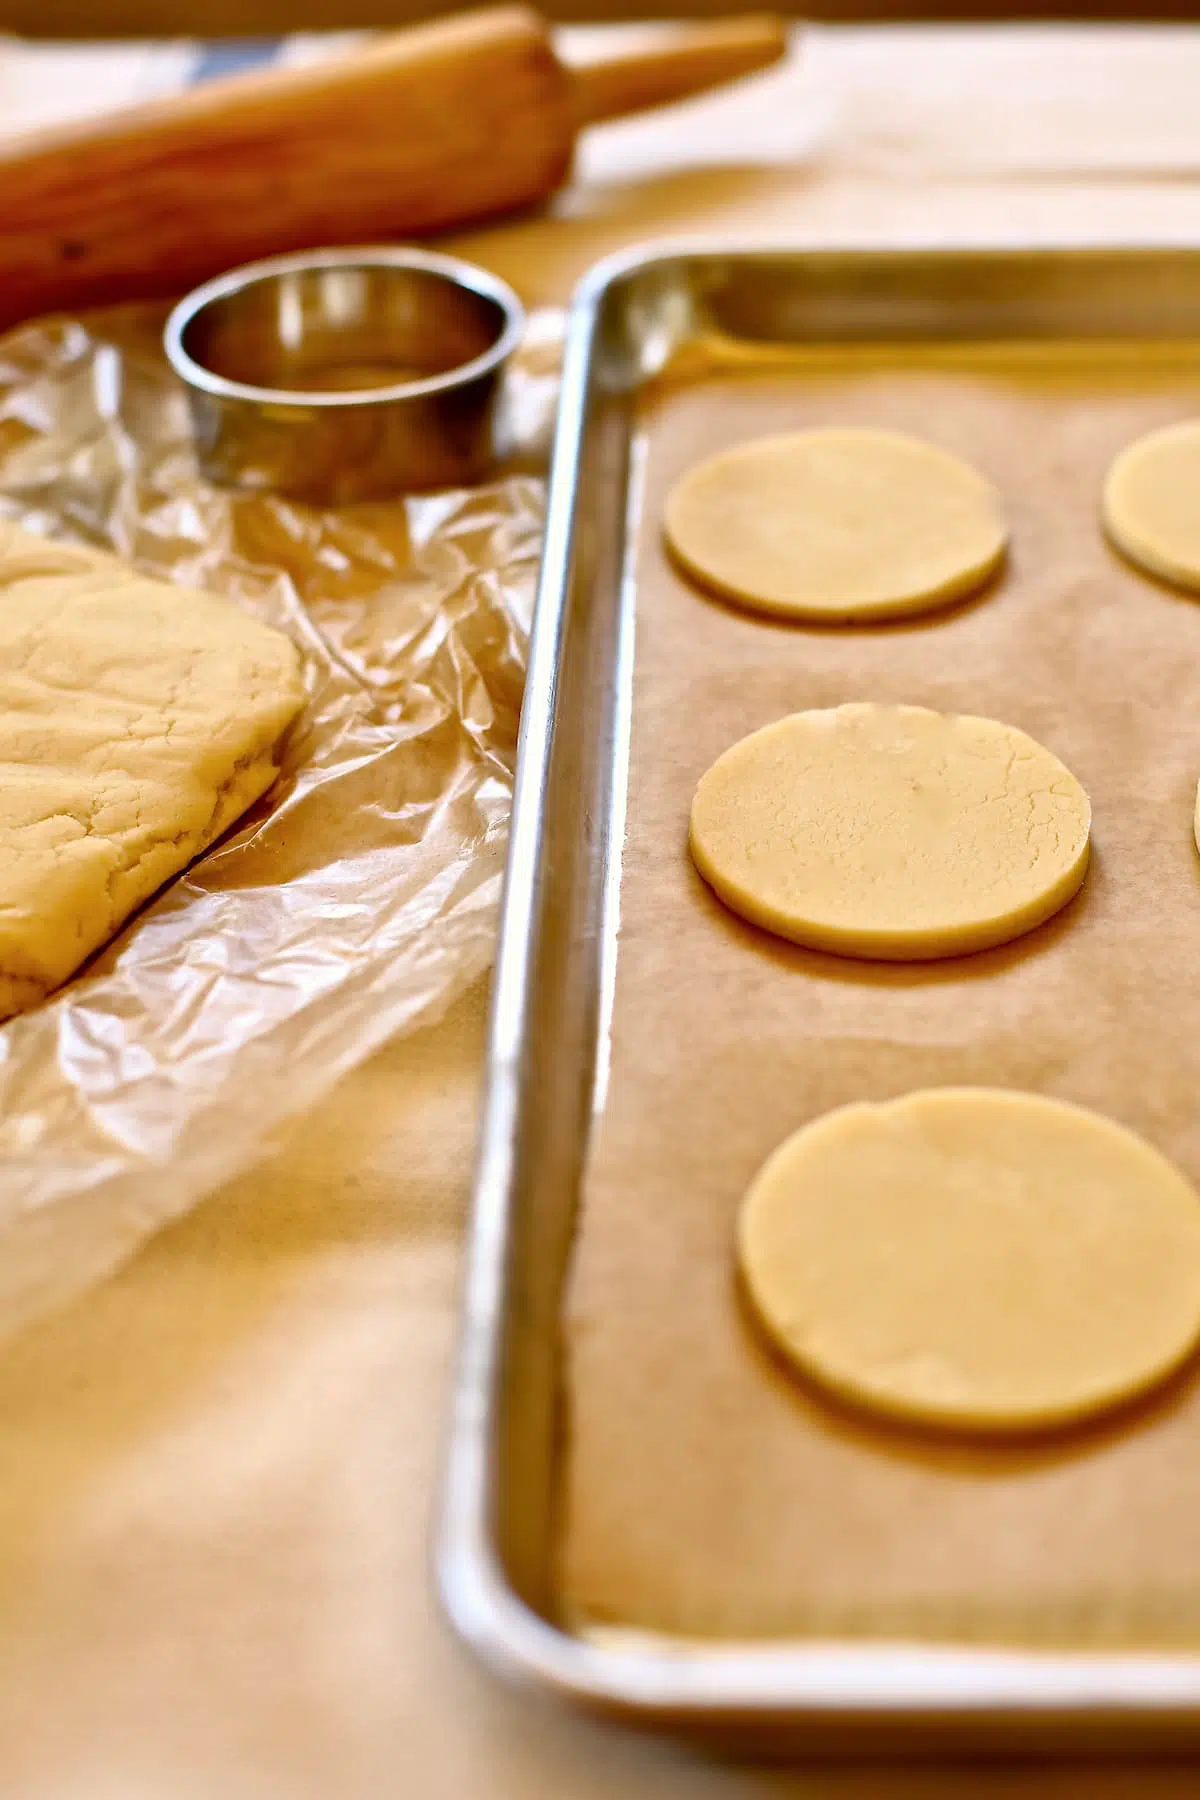 a baking tray of unbaked cookies.